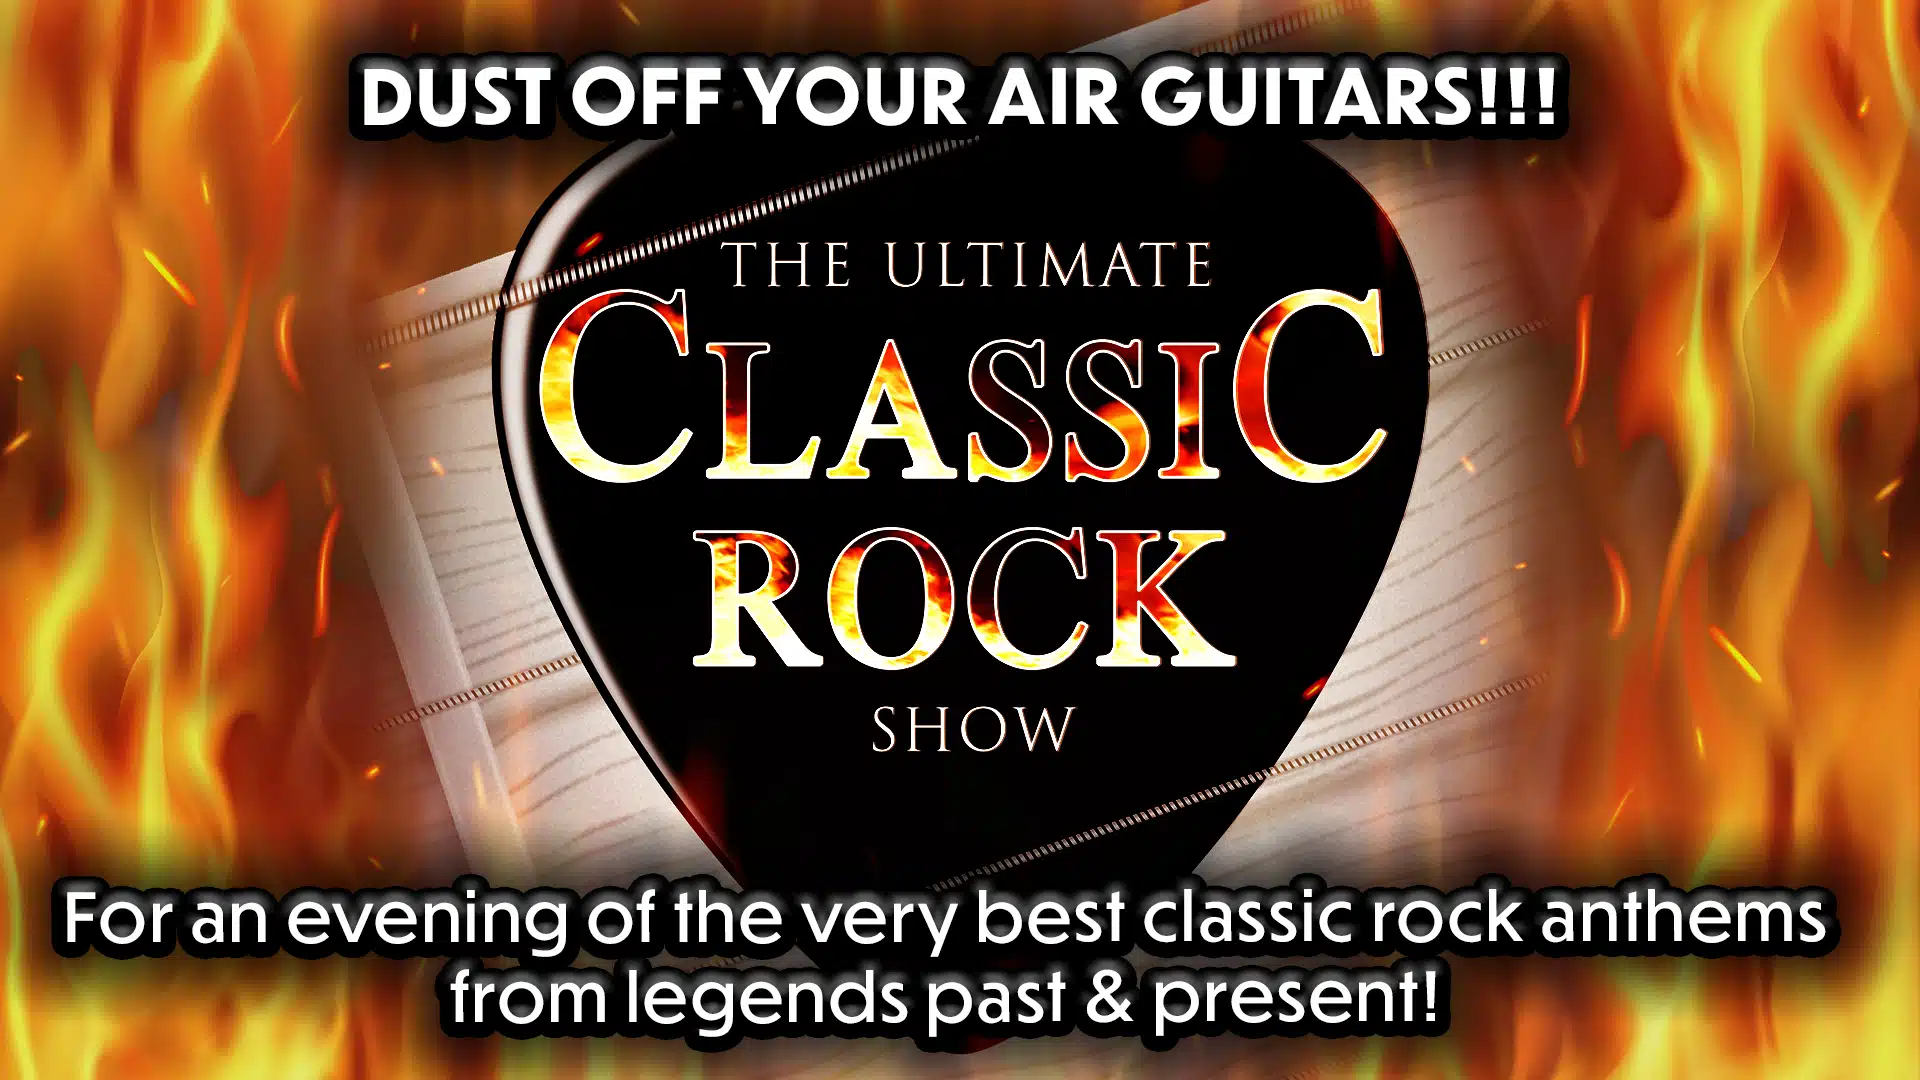 The Ultimate Classic Rockshow